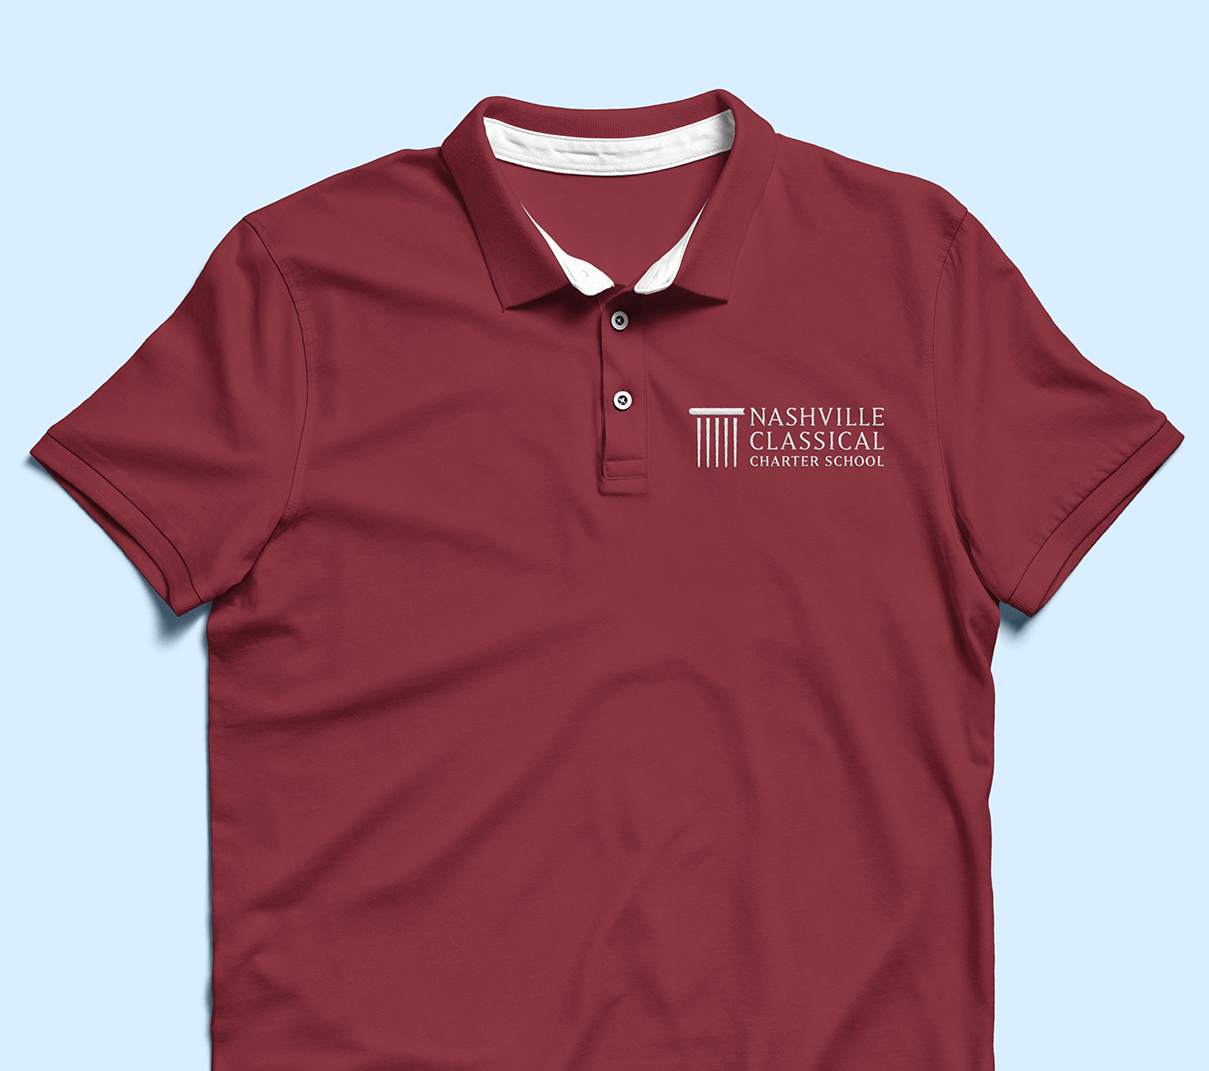 Nashville Classical Charter School rebrand application on polo shirt designed by ST8MNT